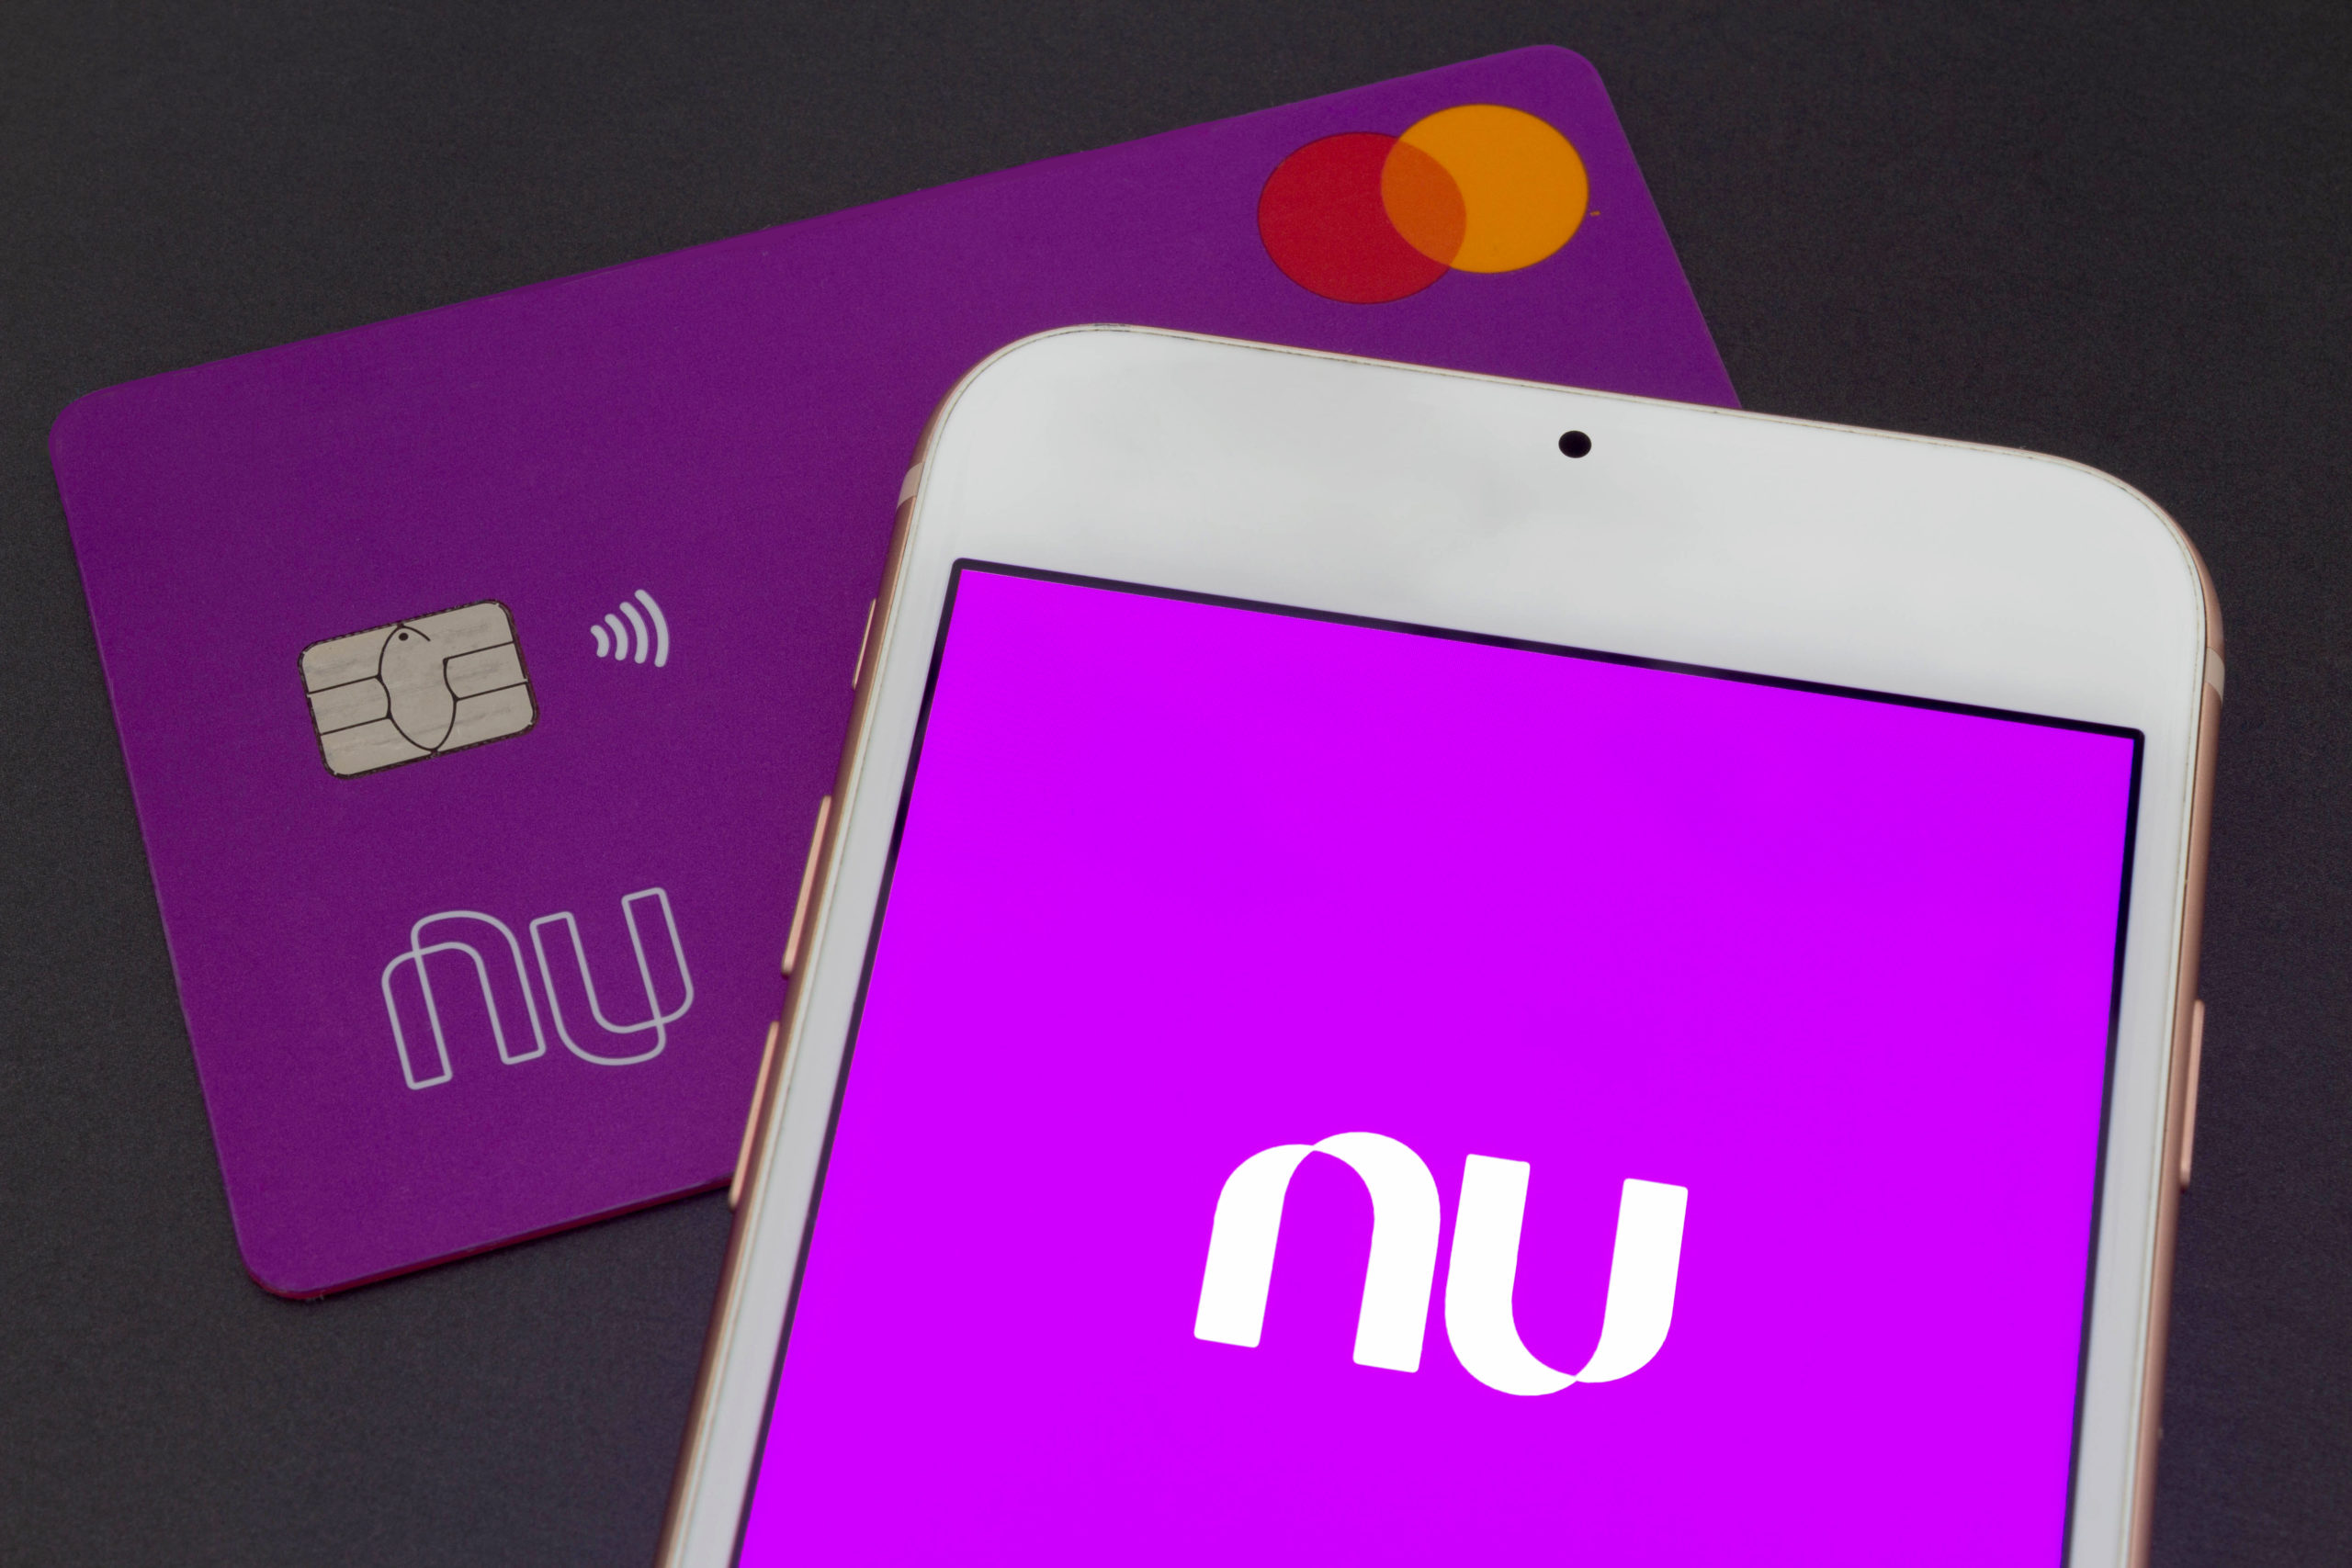 Nubank authorizes customers to increase their credit card limit